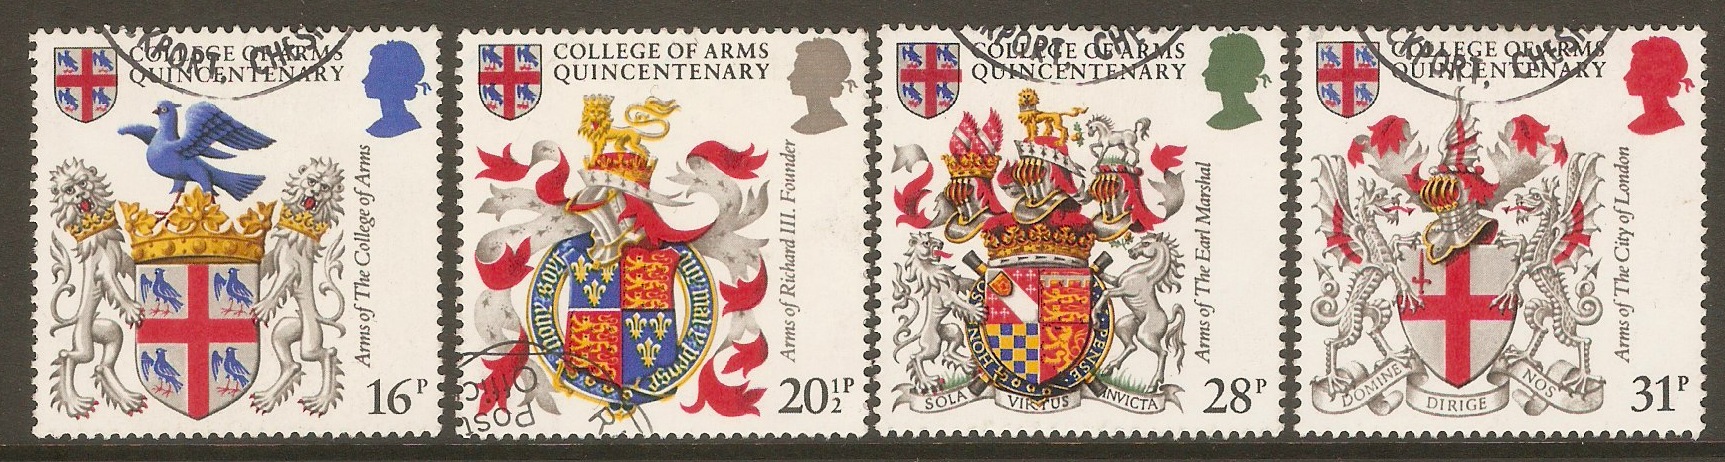 Great Britain 1984 College of Arms set. SG1236-SG1239.